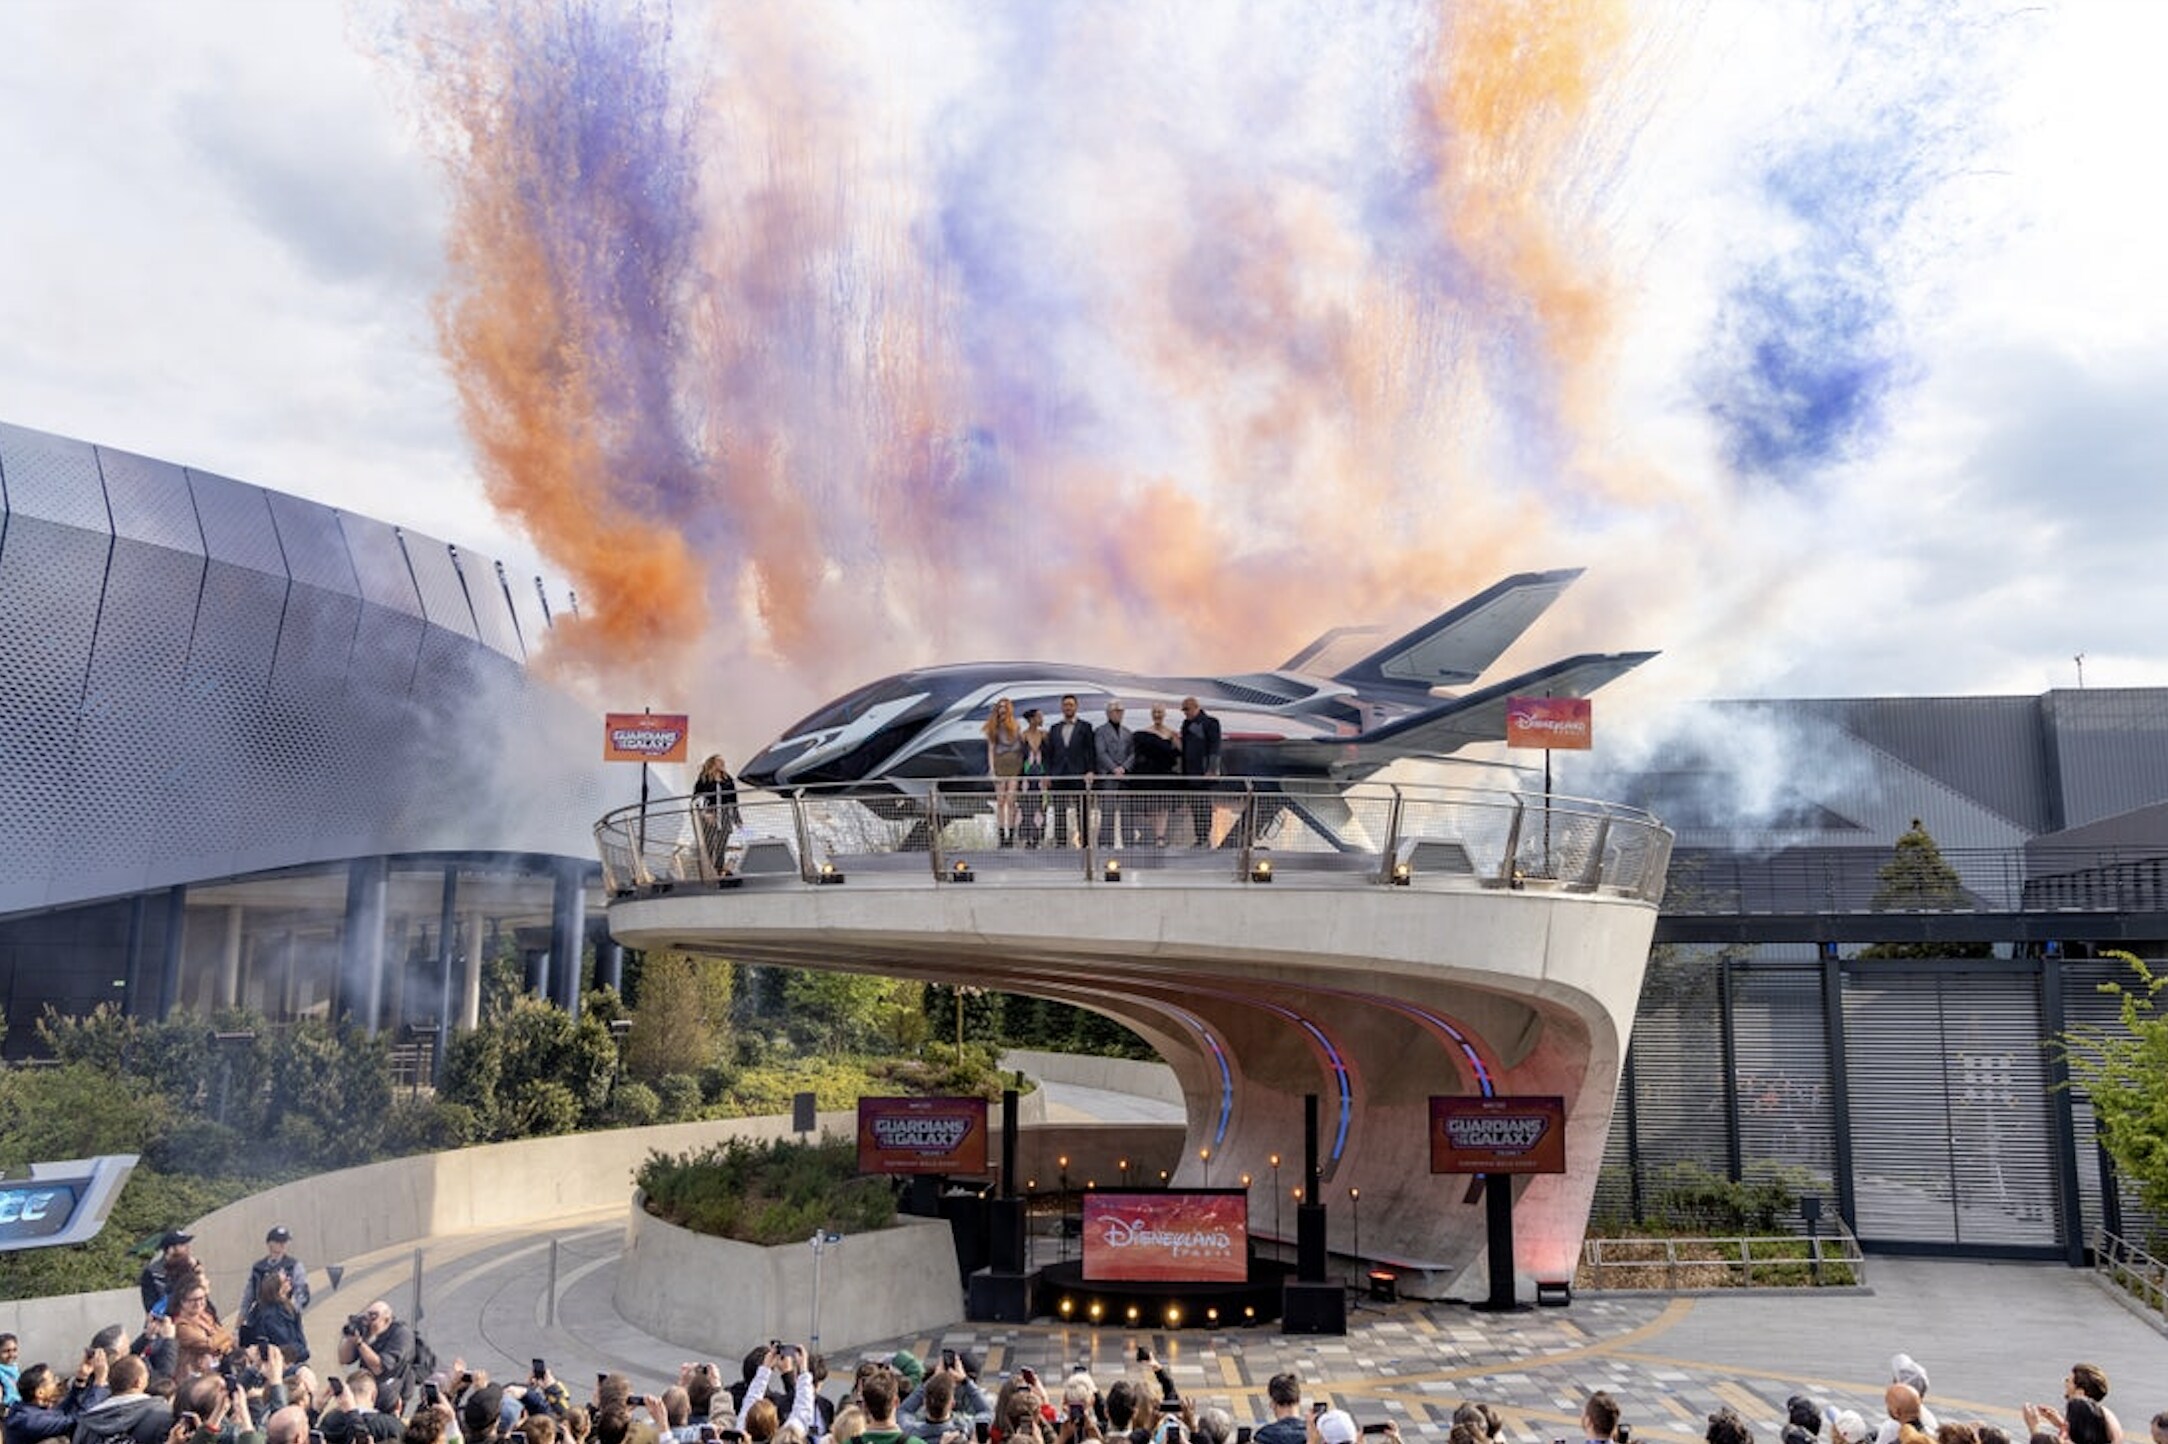 Guardians of the Galaxy Vol. 3 cast and director stood in front of the Quinn jet at Disneyland Paris with orange and purple smoke behind them.